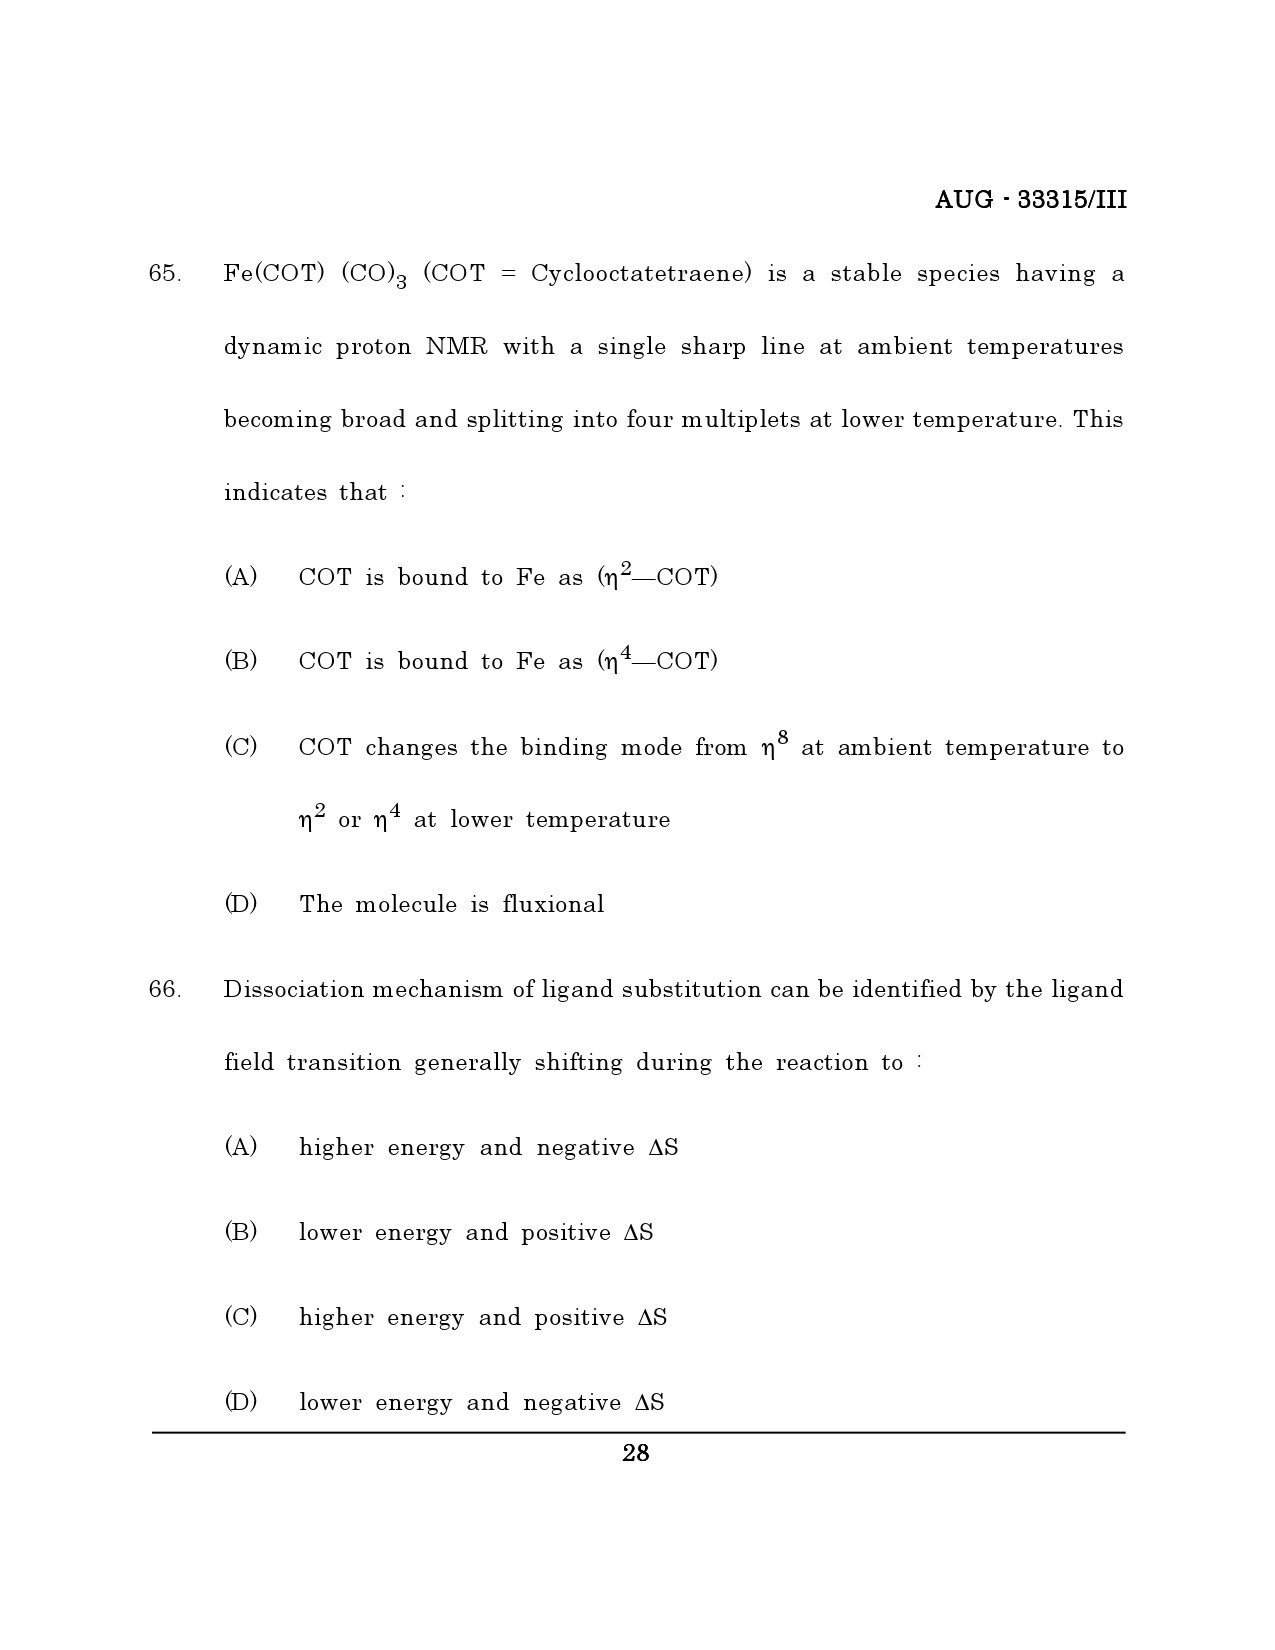 Maharashtra SET Chemical Sciences Question Paper III August 2015 27